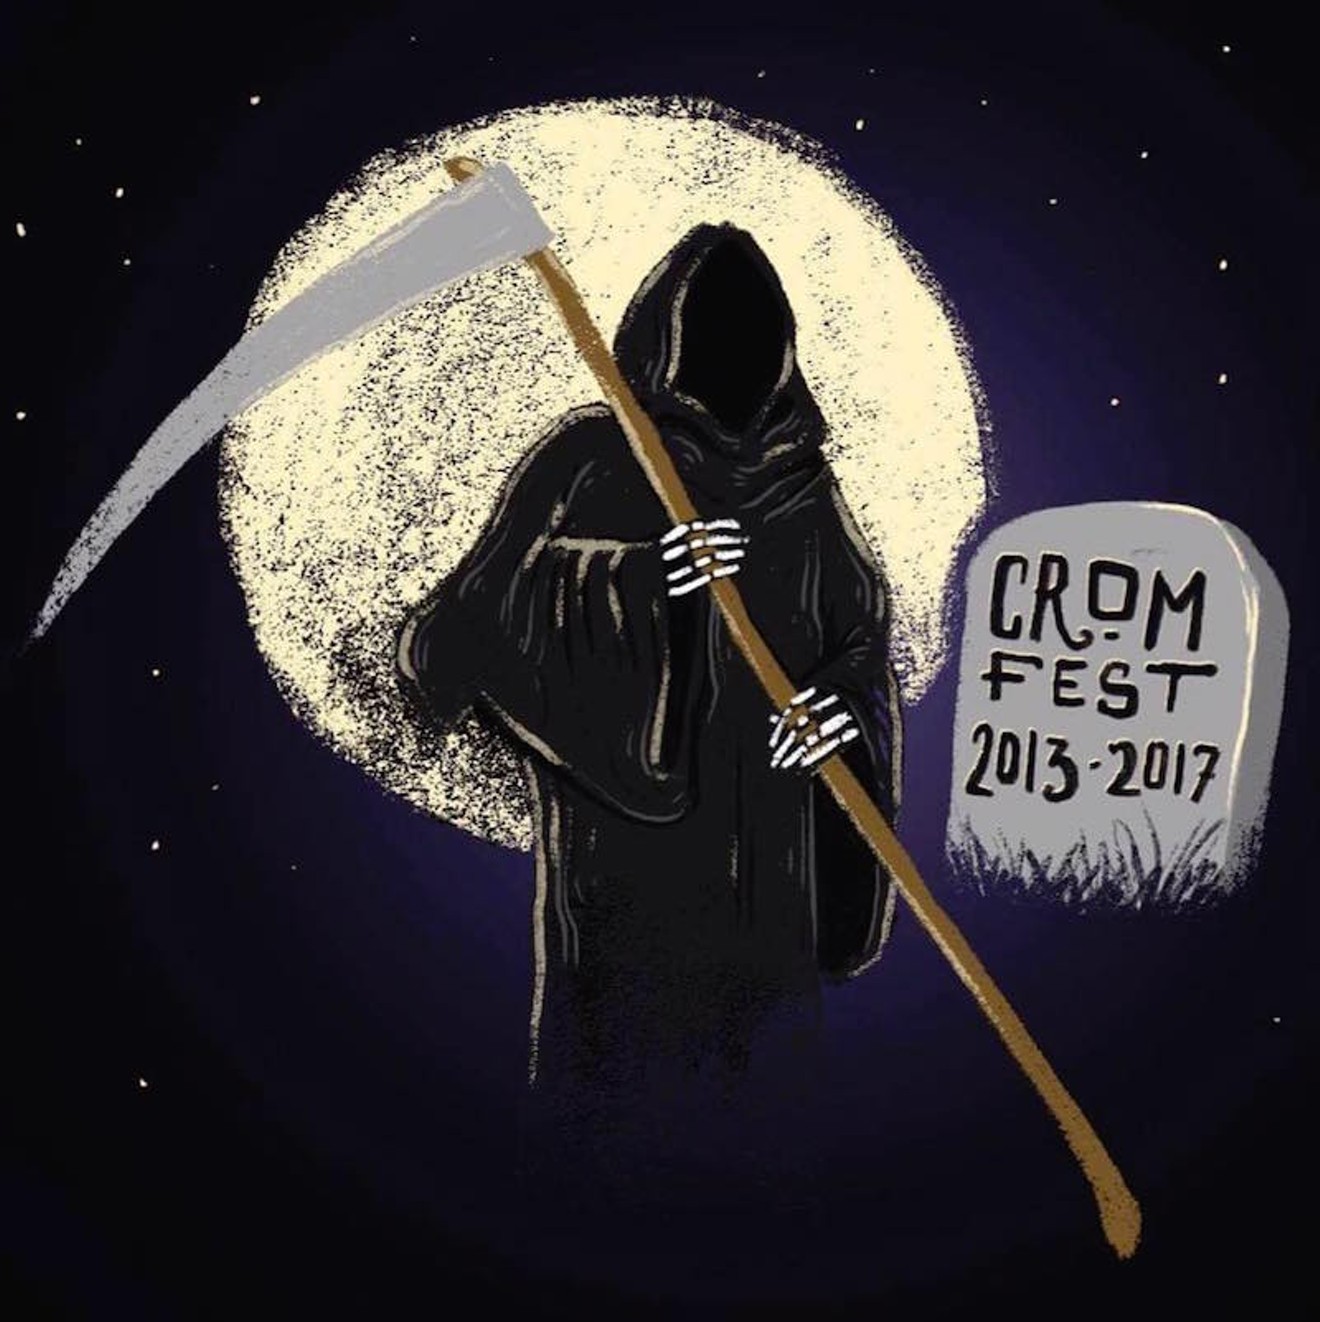 Crom Comedy Festival comes to a close May 19-21.